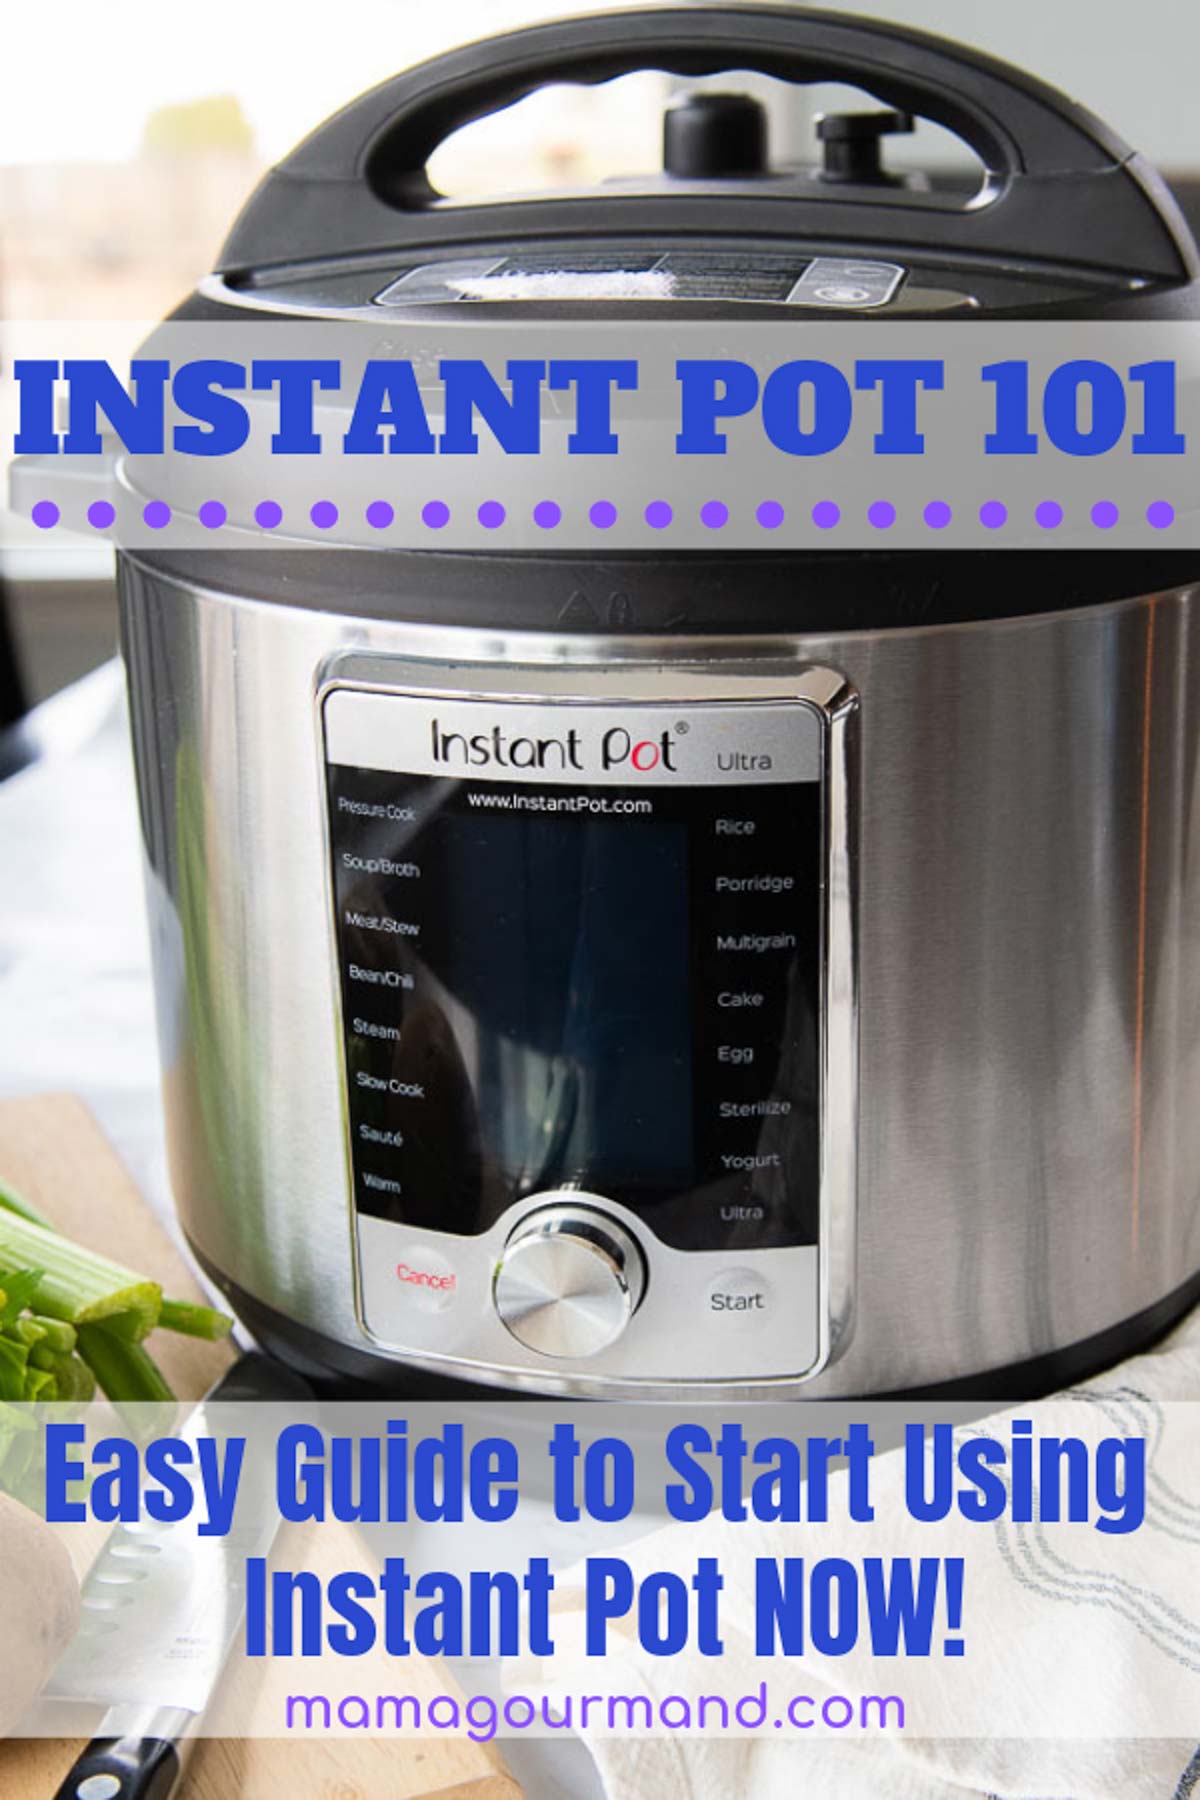 How to Use Instant Pot - Easy Beginner's Guide and Instructions